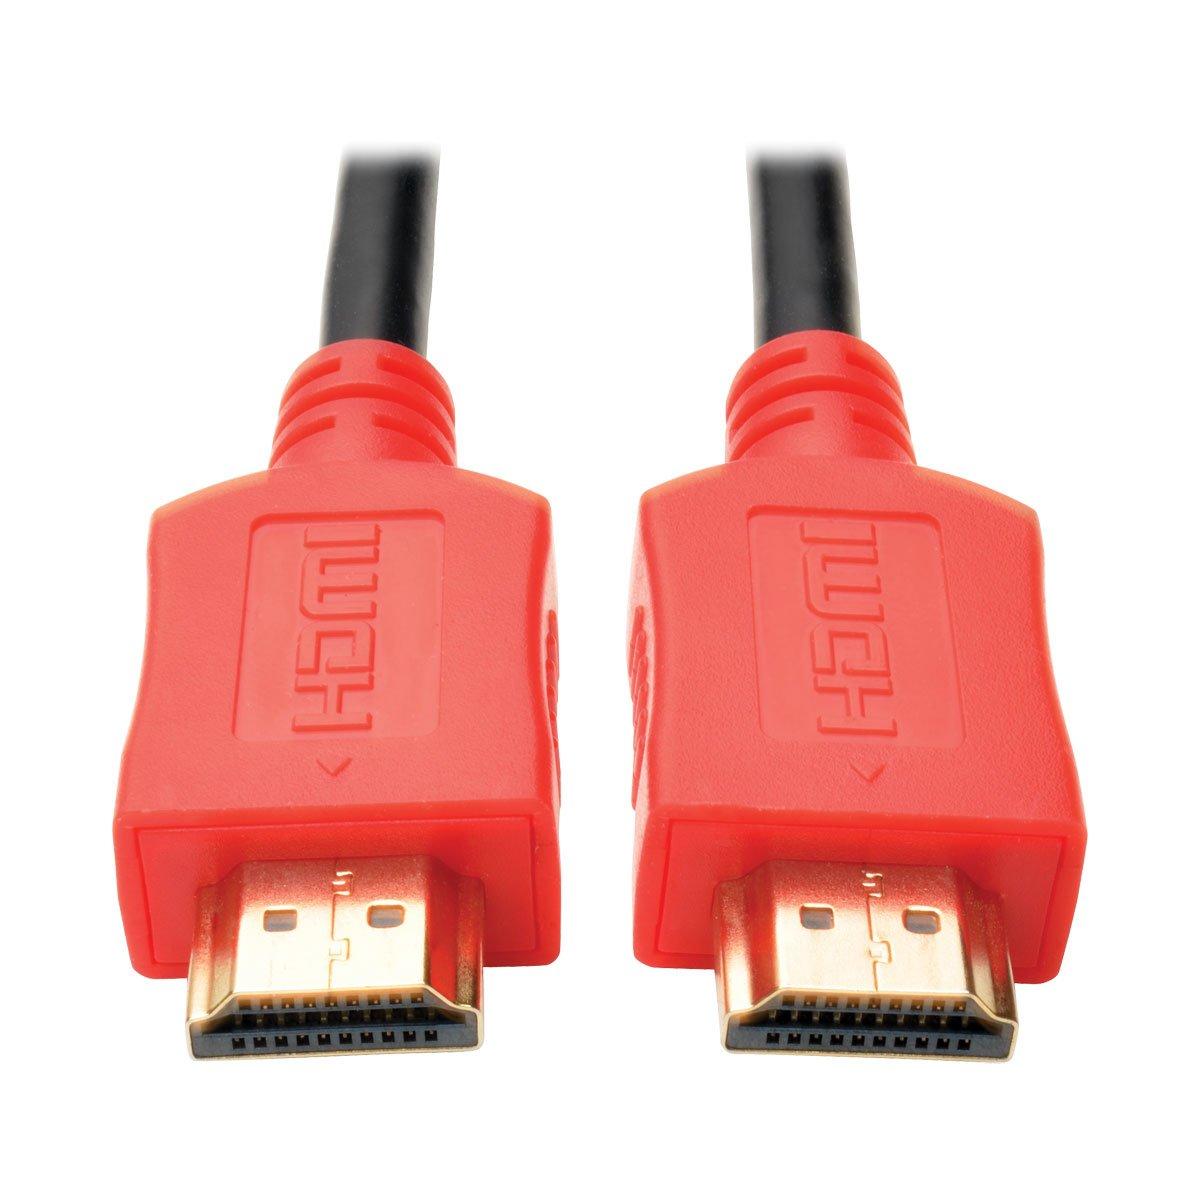 Tripp Lite High-Speed HDMI Cable with Digital Video and Audio, Ultra HD 4K x 2K, Red, 6' Red 6 ft.